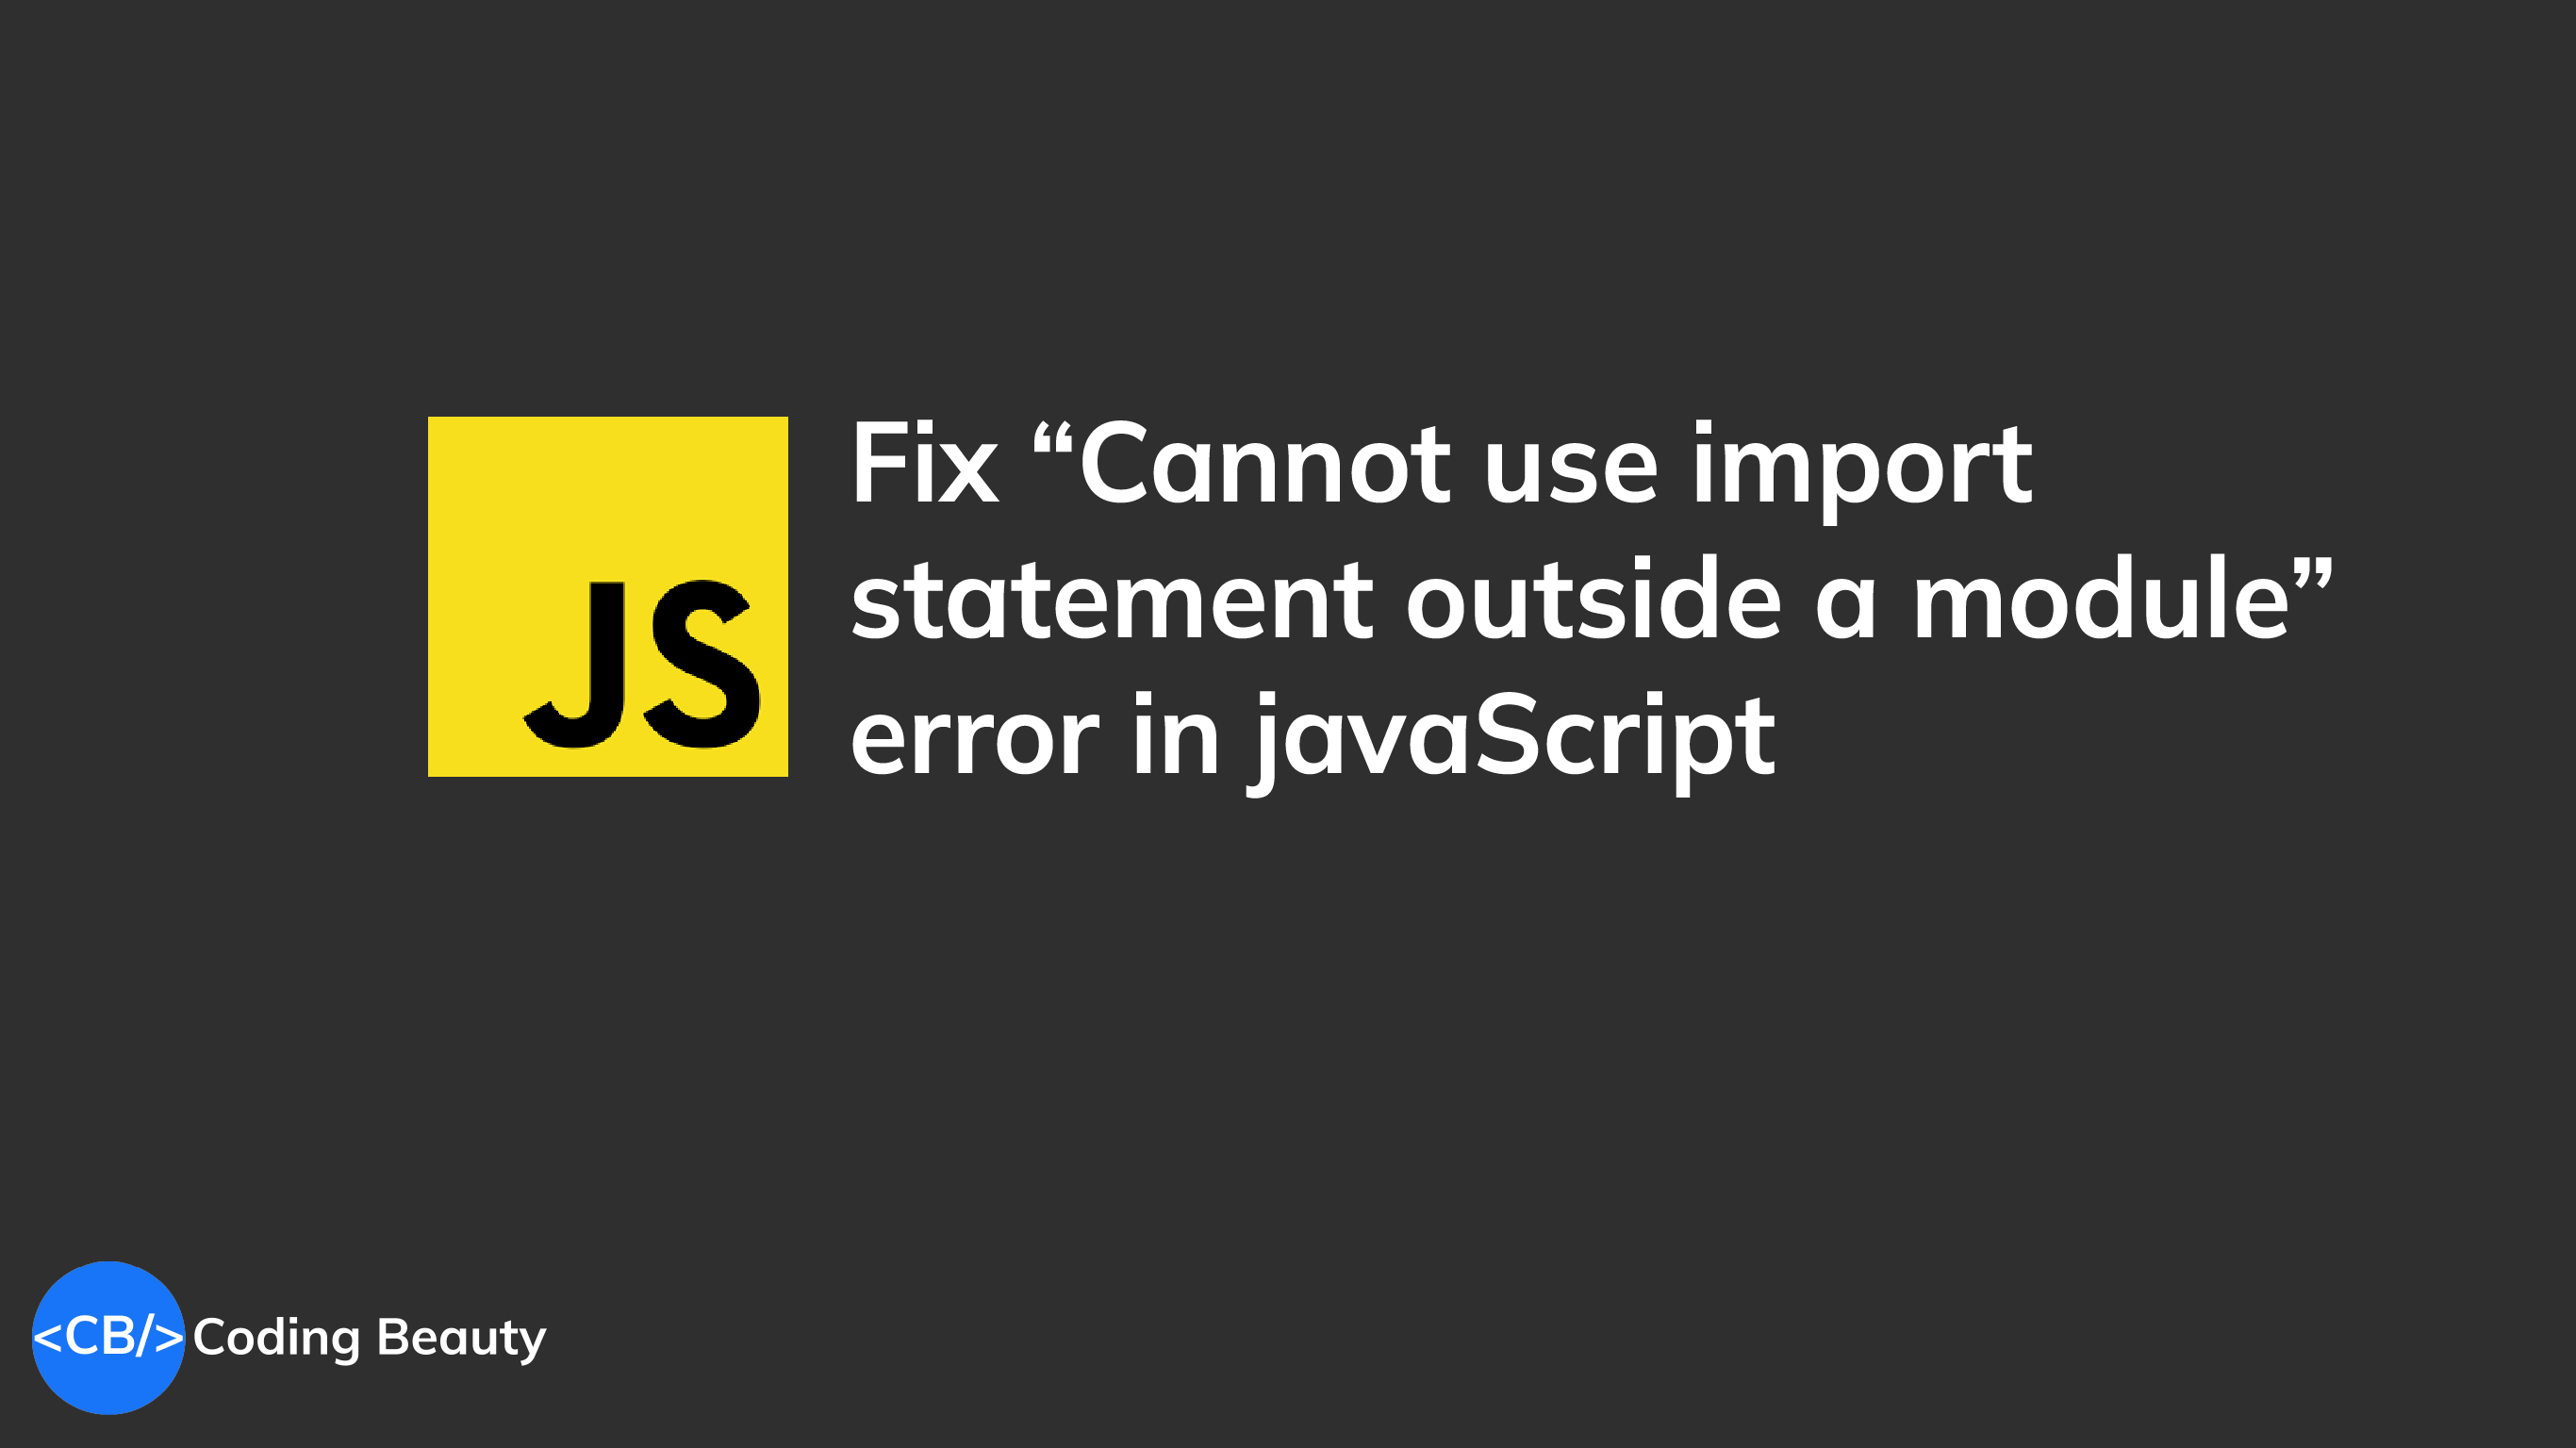 [SOLVED] Cannot use import statement outside a module in JavaScript